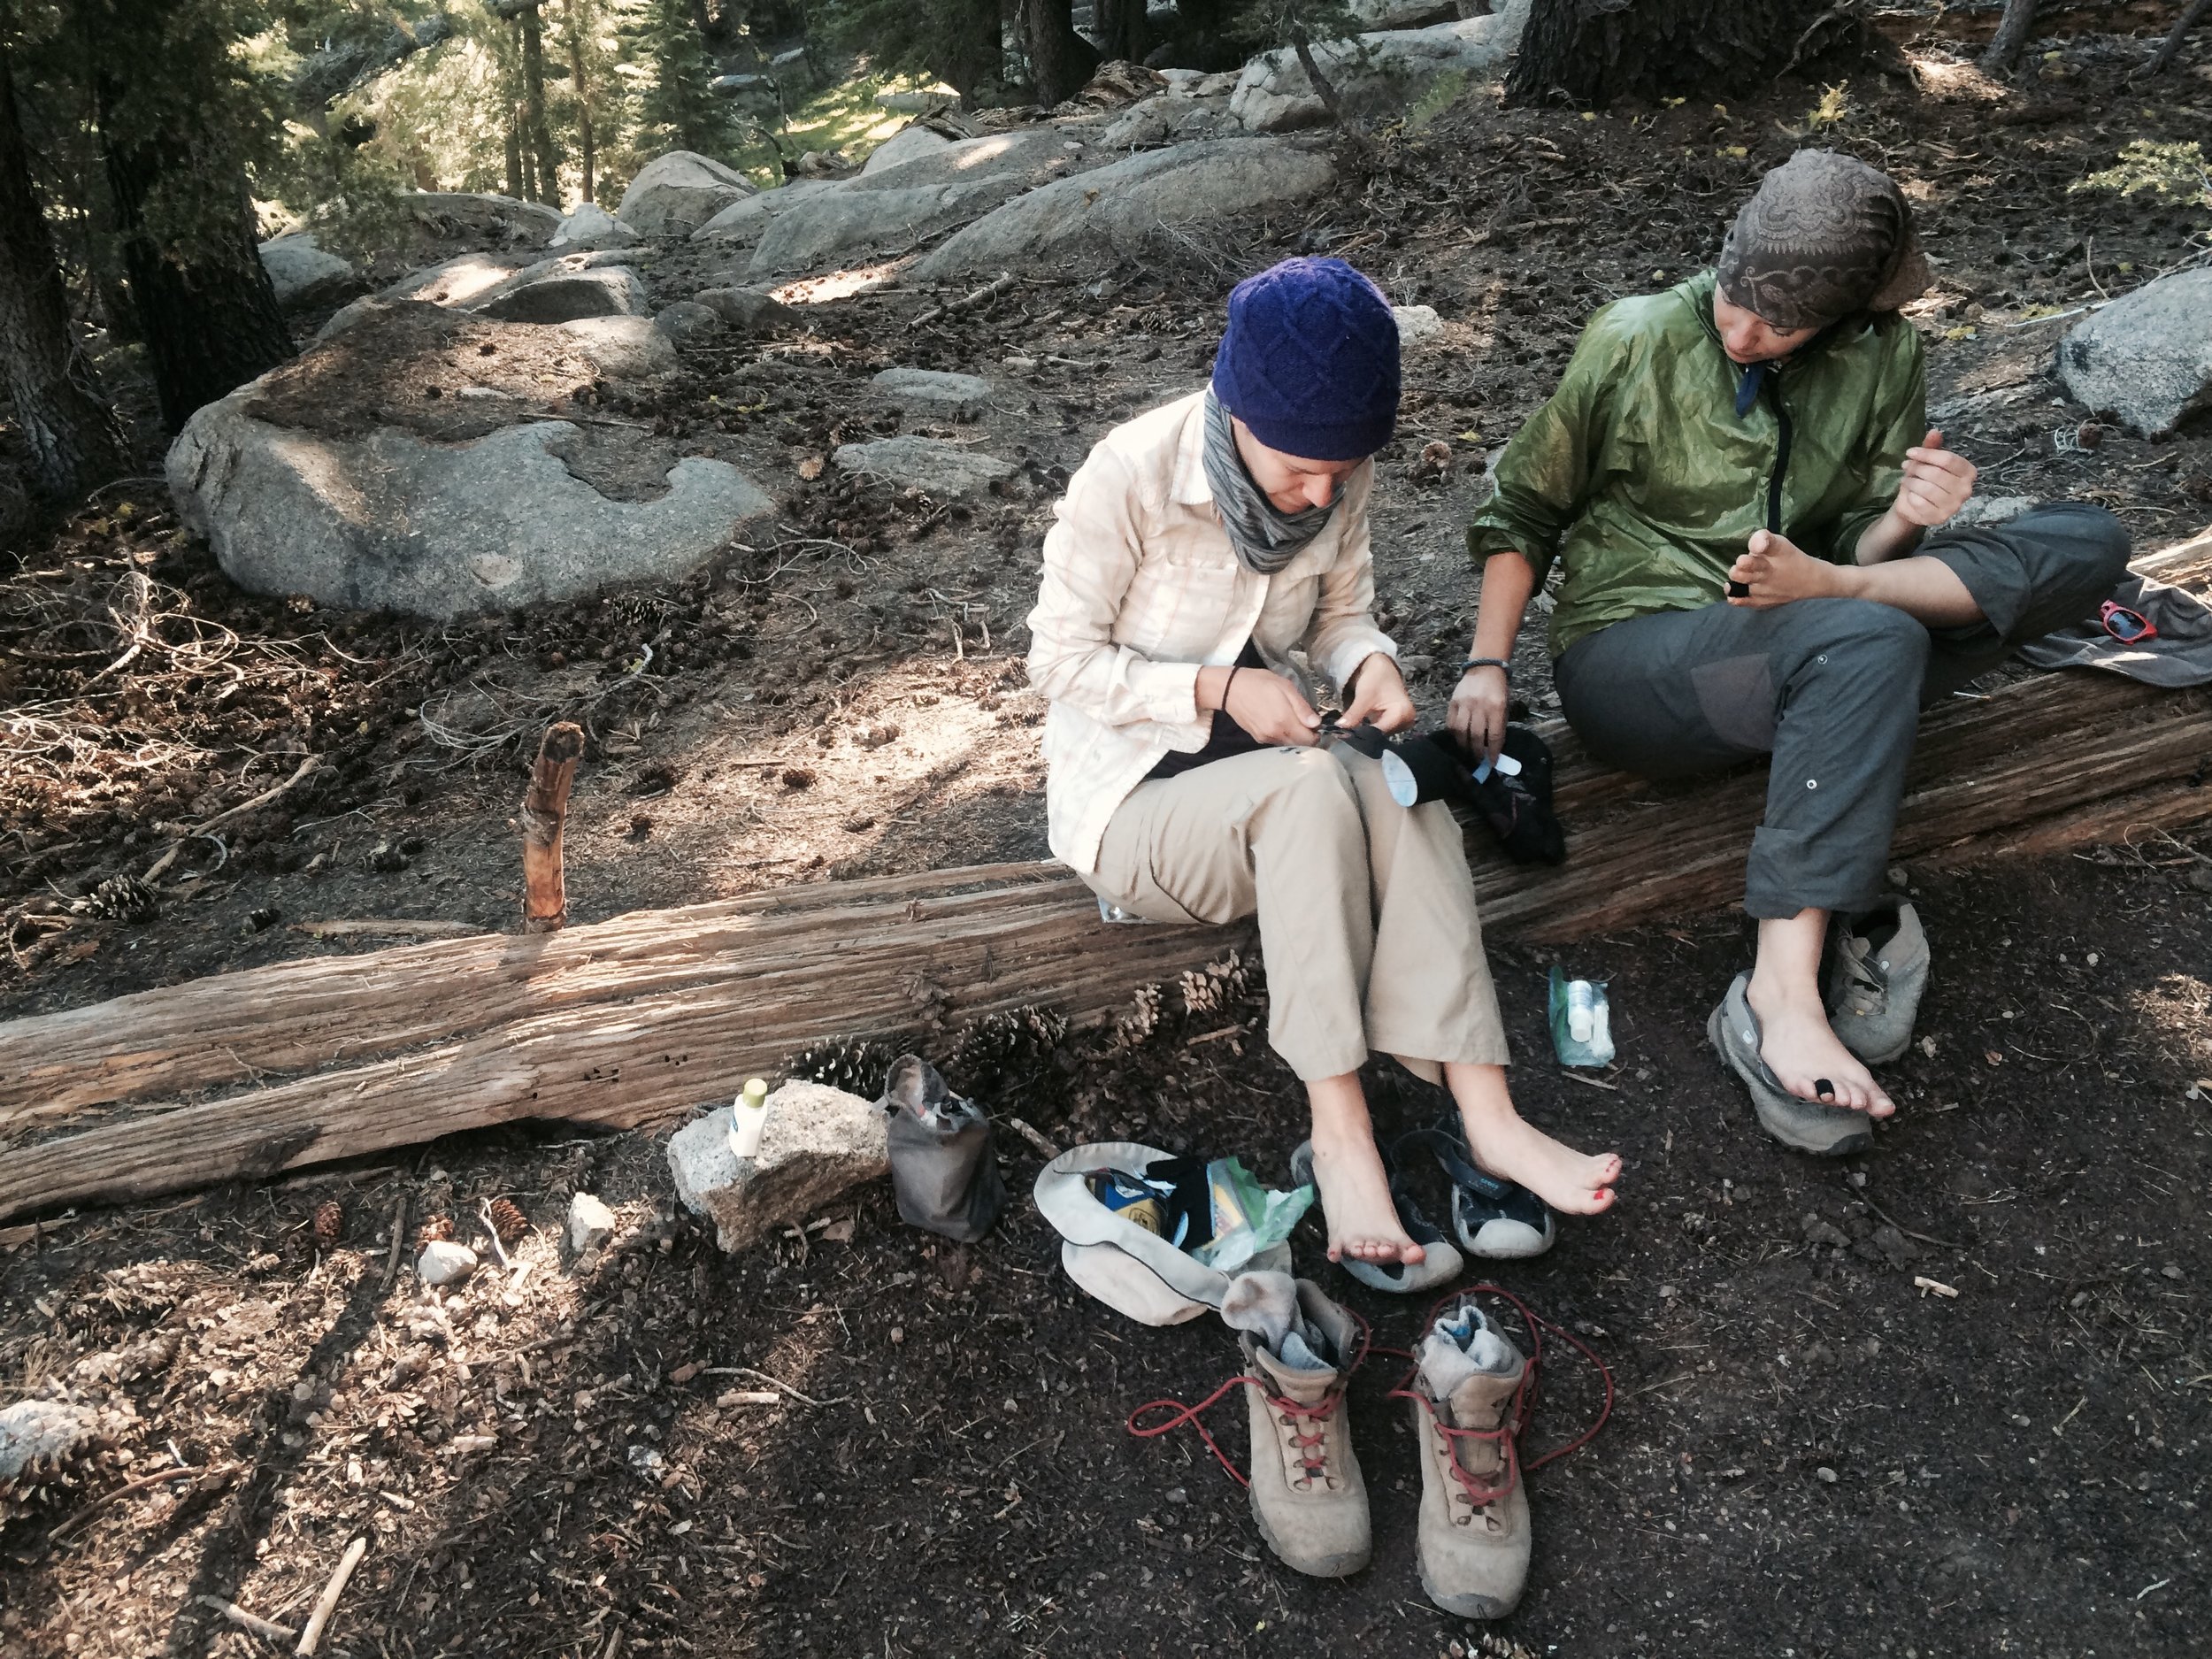  Foot care -- very important on the trail! Our foot care bible is the book "Fixing Your Feet" 